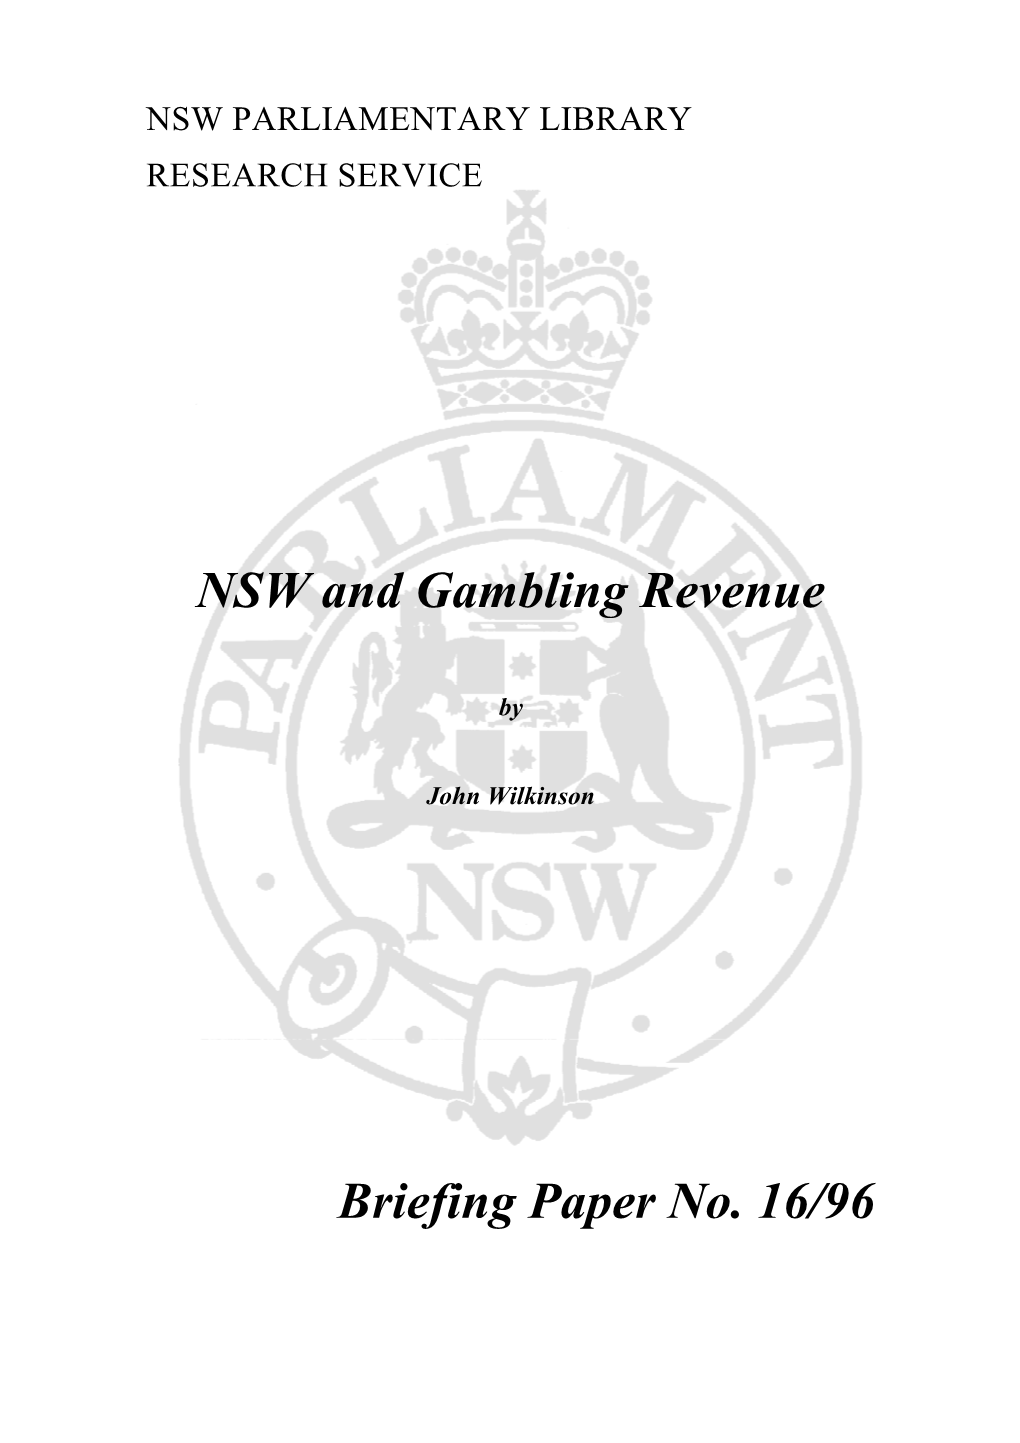 NSW and Gambling Revenue